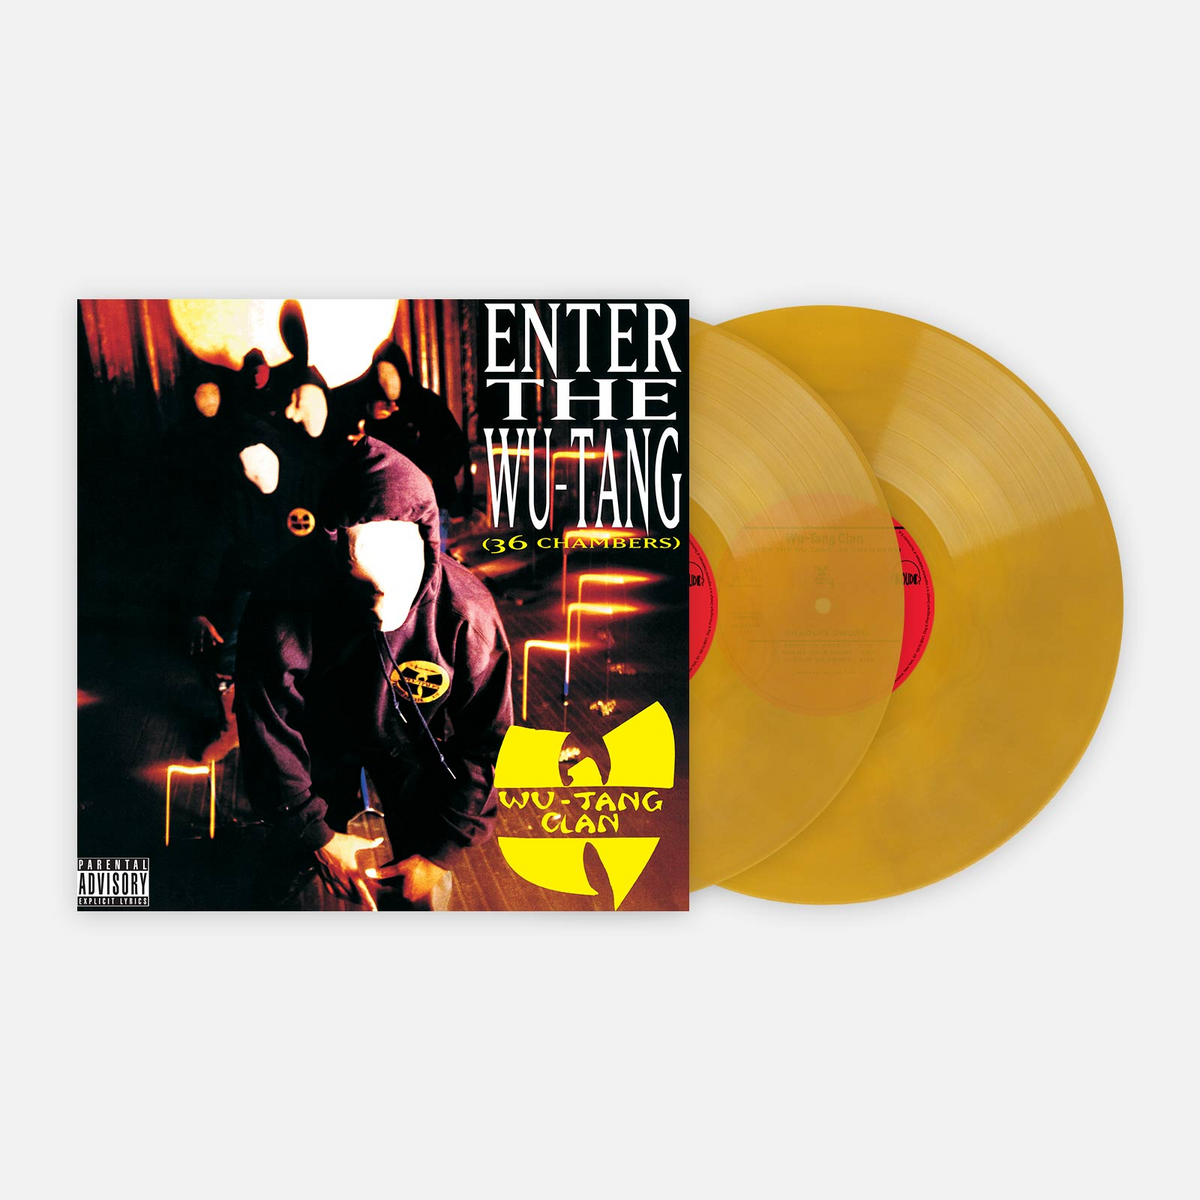 Wu-Tang Clan - Enter The Wu-Tang (36 Chambers) 2LP (Vinyl Me Please Edition, Gold Galaxy Vinyl, Remastered)